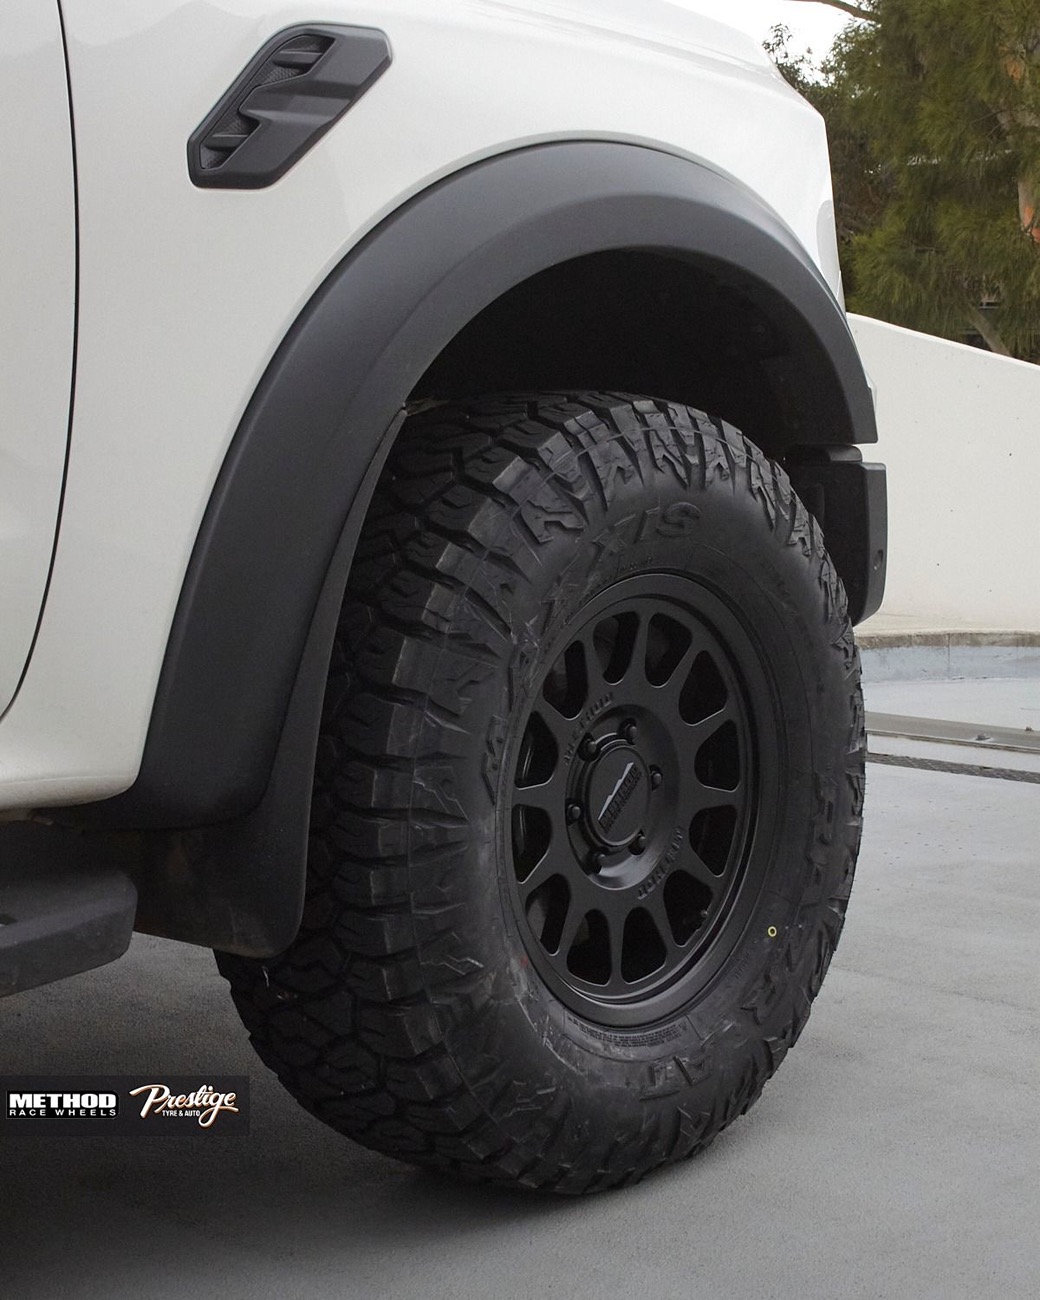 Ford Ranger Have my upgraded Wheels & Tires sorted: 295/70R17 34” tall 12” wide +30 offset IMG_5641